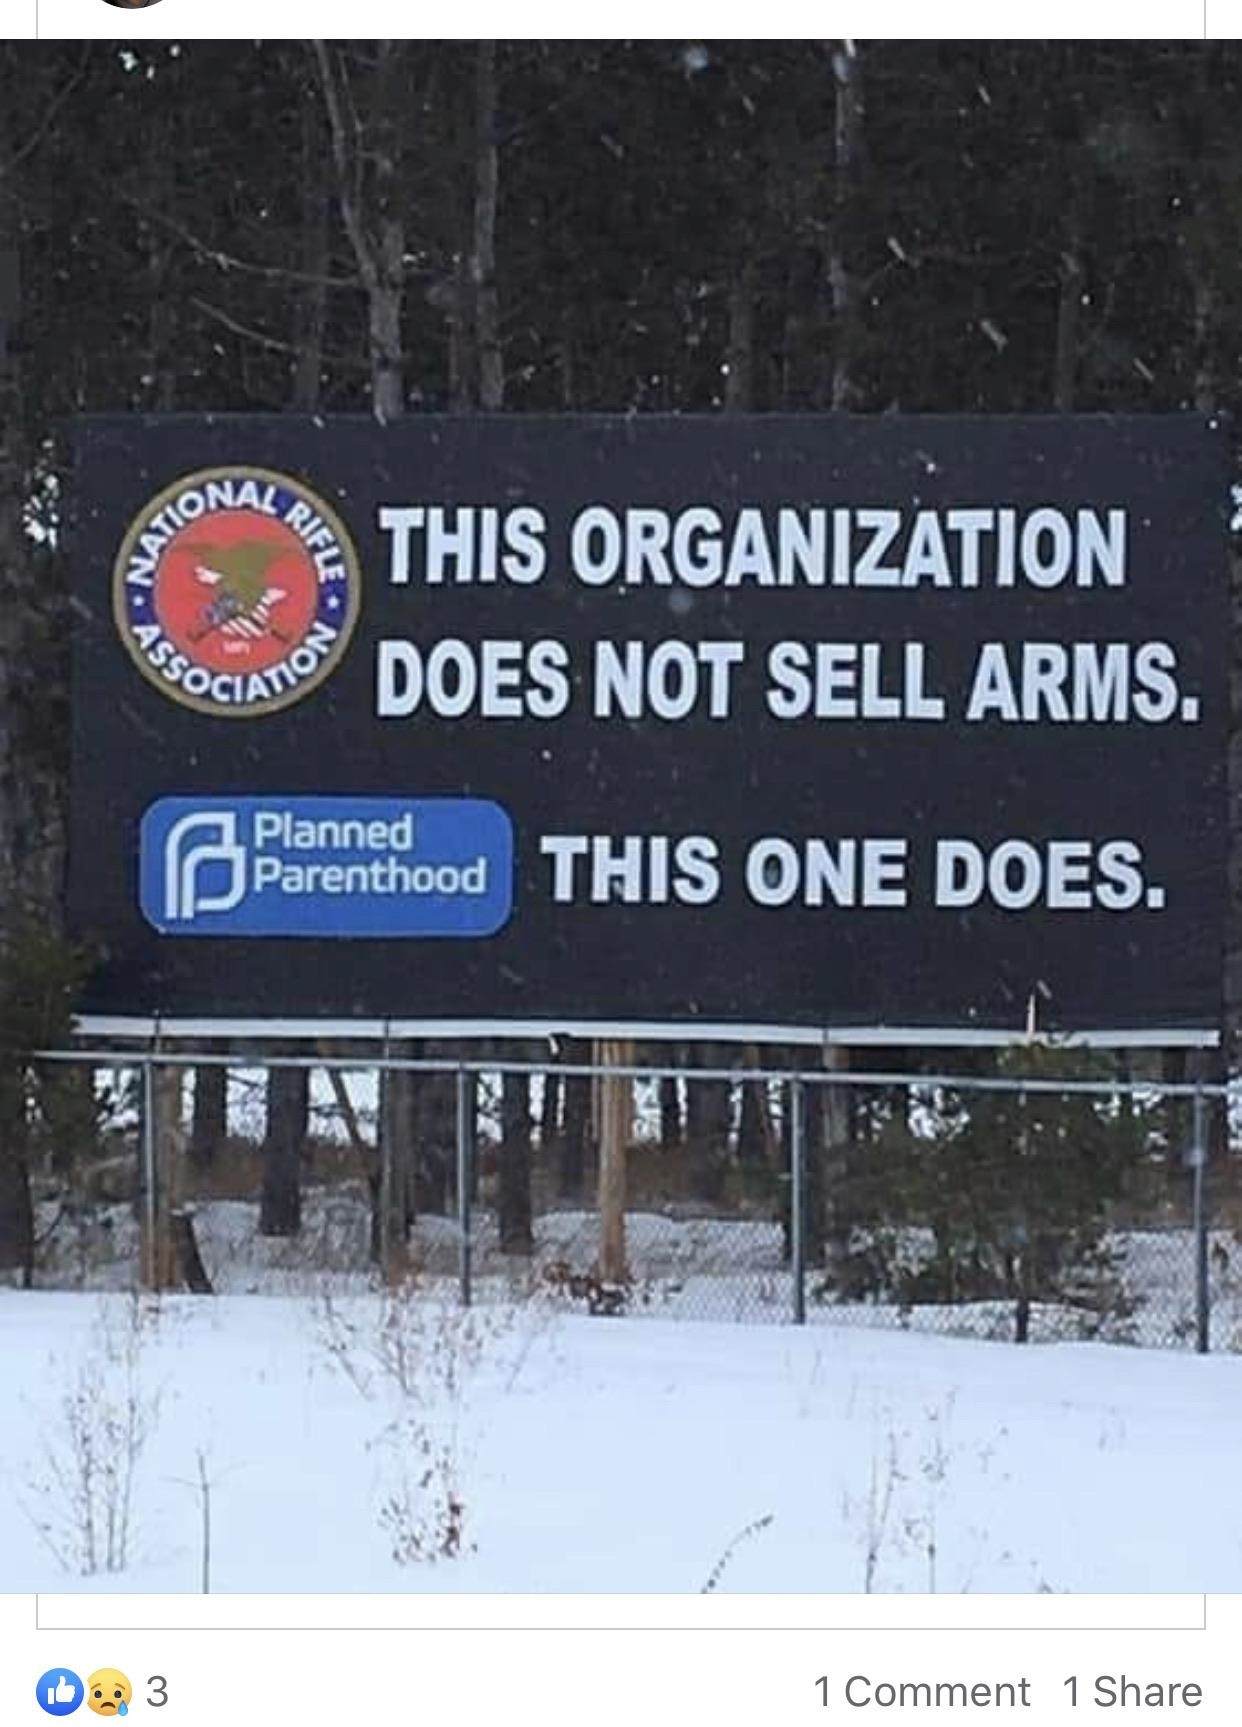 snow - Onal This Organization Does Not Sell Arms. Anon Planned Parenthood This One Does. 1 Comment 1